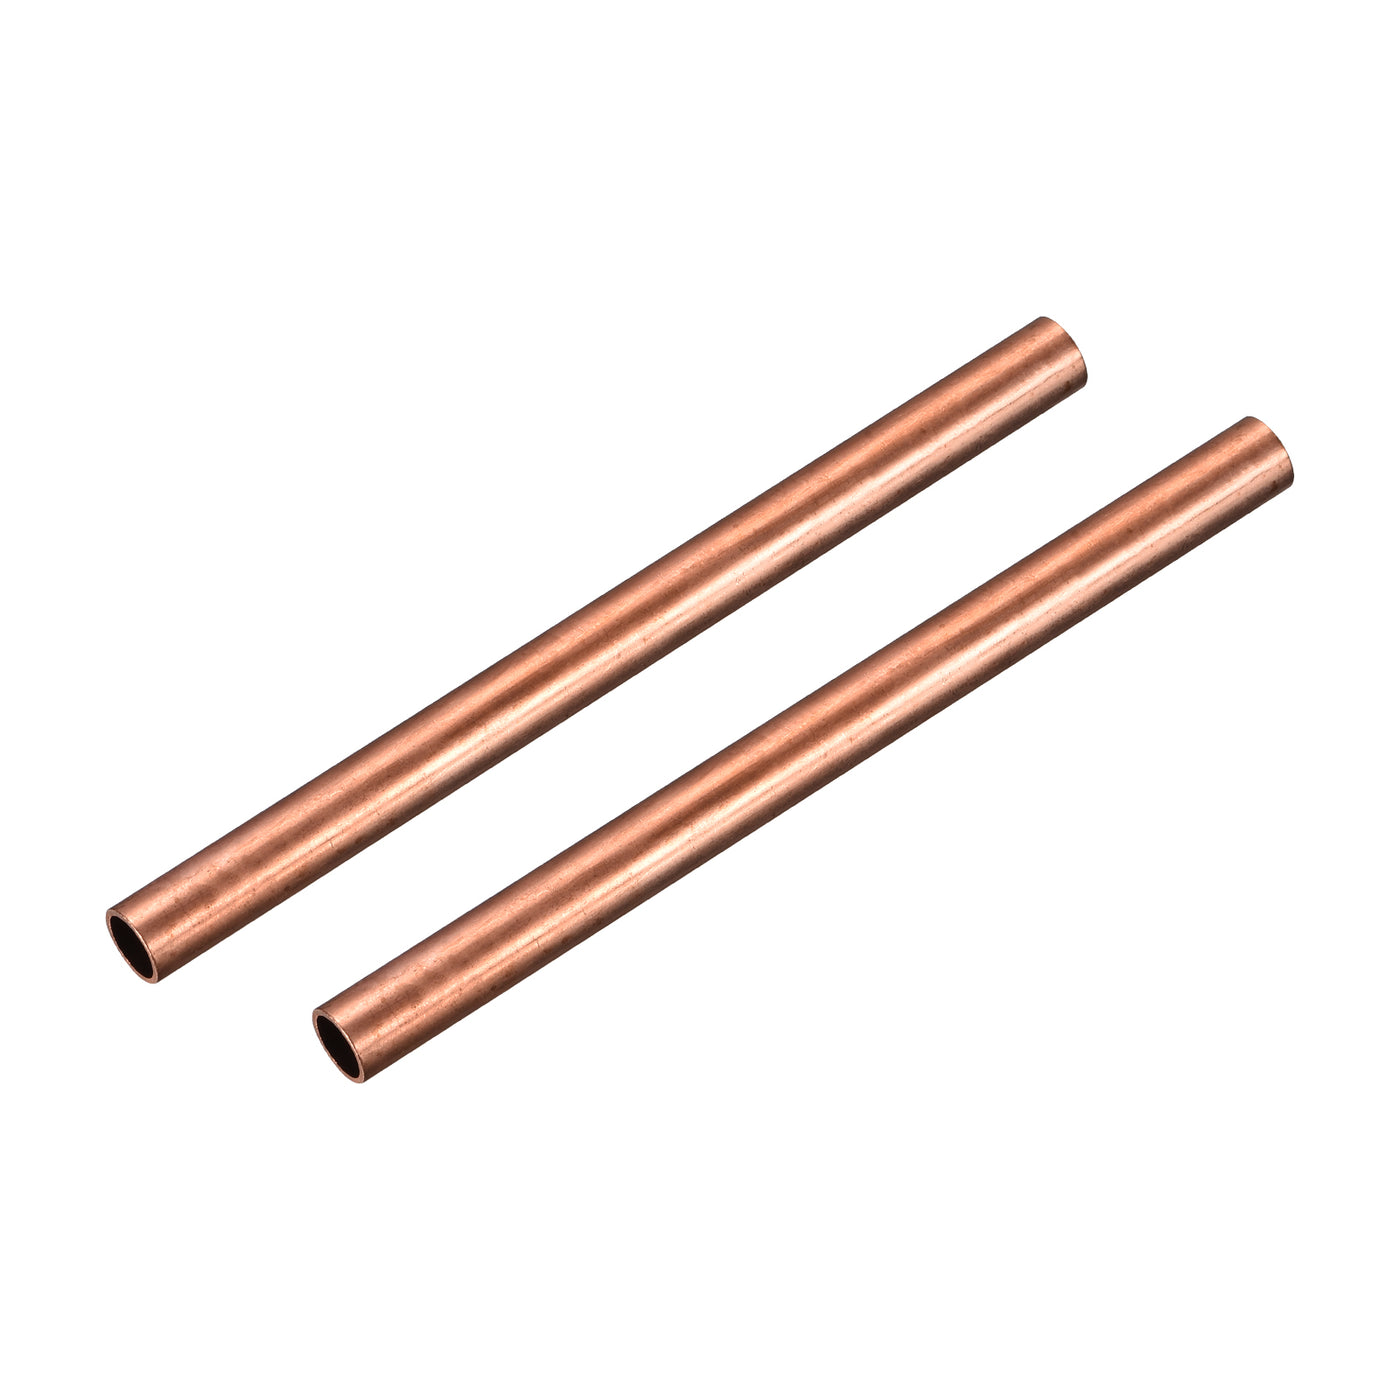 uxcell Uxcell Copper Round Tube 11mm OD 1mm Wall Thickness 150mm Length Pipe Tubing 2 Pcs